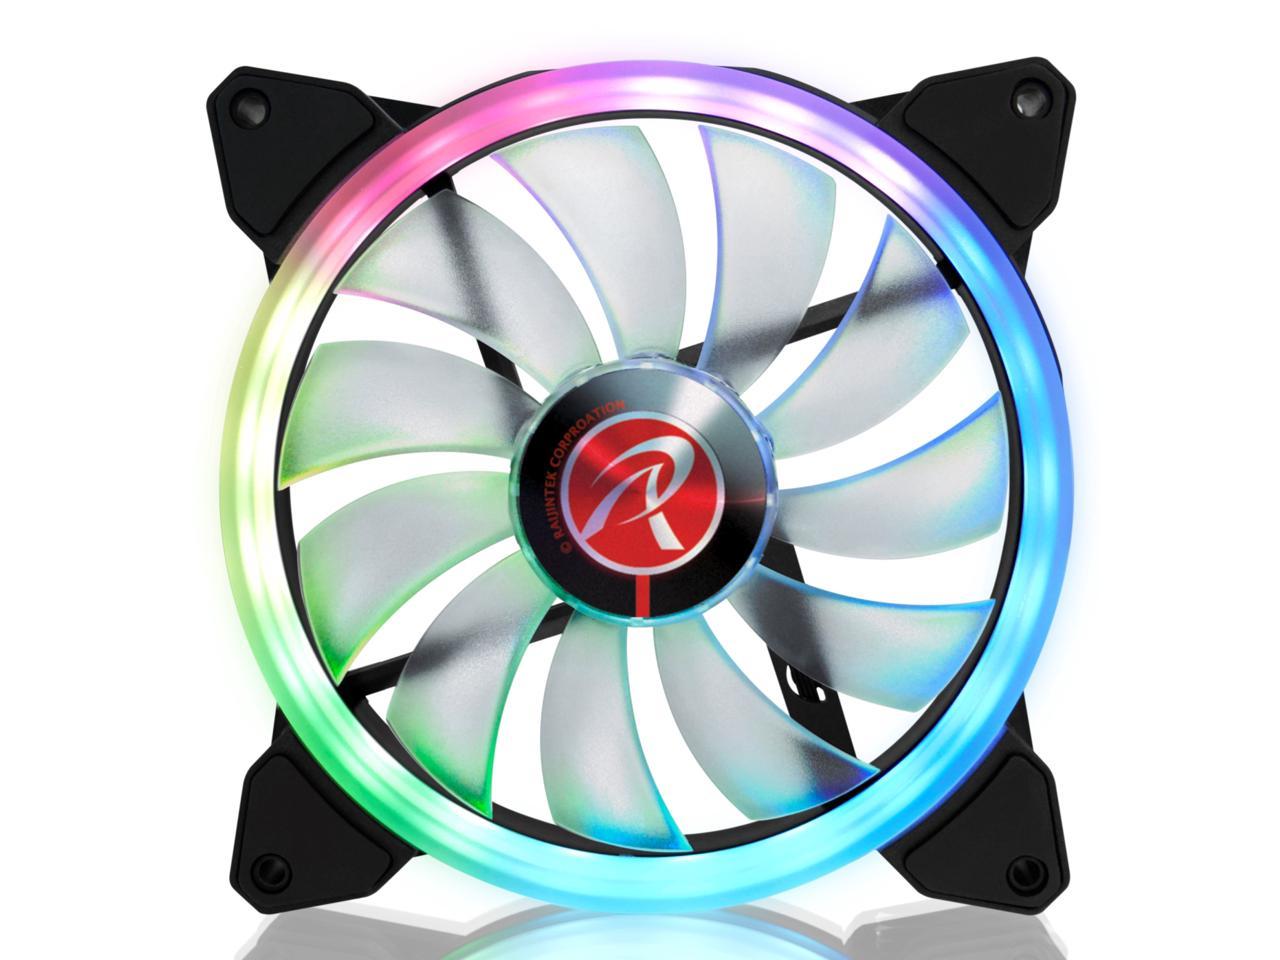 IRIS 14 RBW ADD-1, Addressable RGB 1pack, 14025 Addressable RGB PWM fan, compatible with ASUS/MSI 5V ADD header